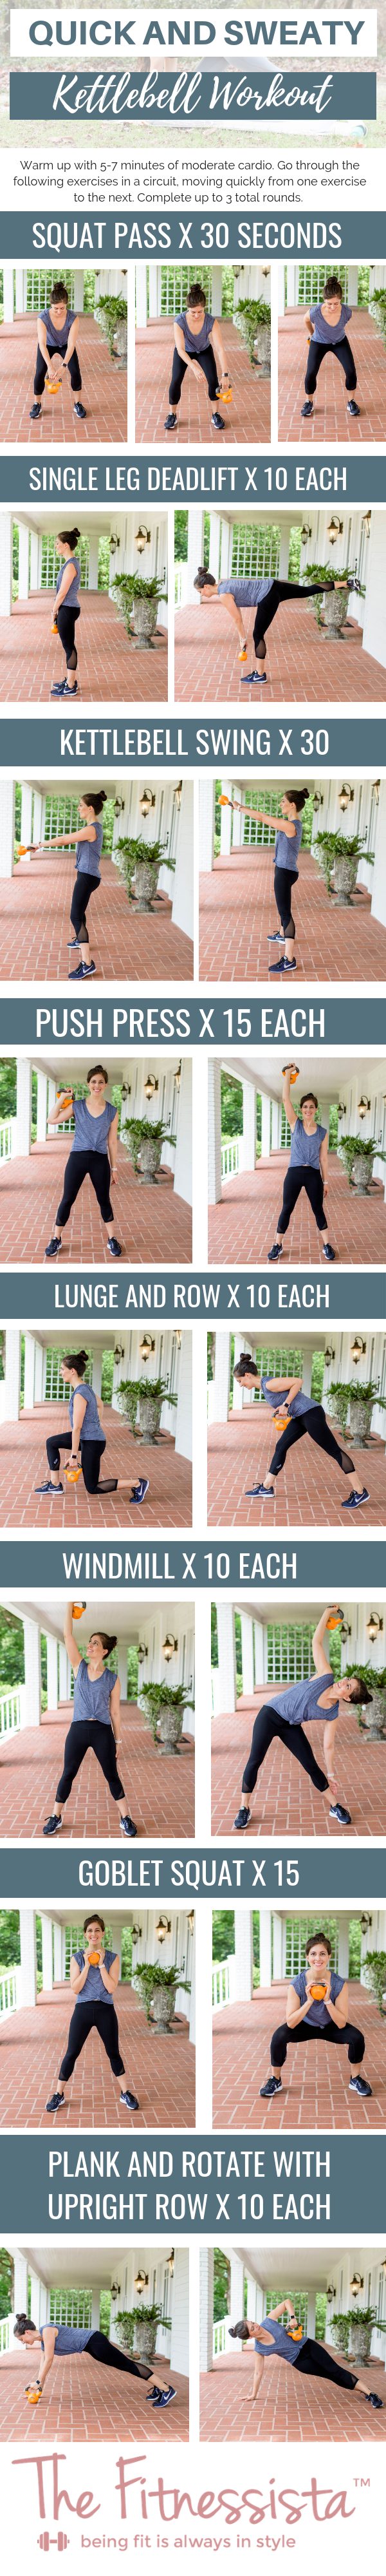 QUICK AND SWEATY KETTLEBELL WORKOUT